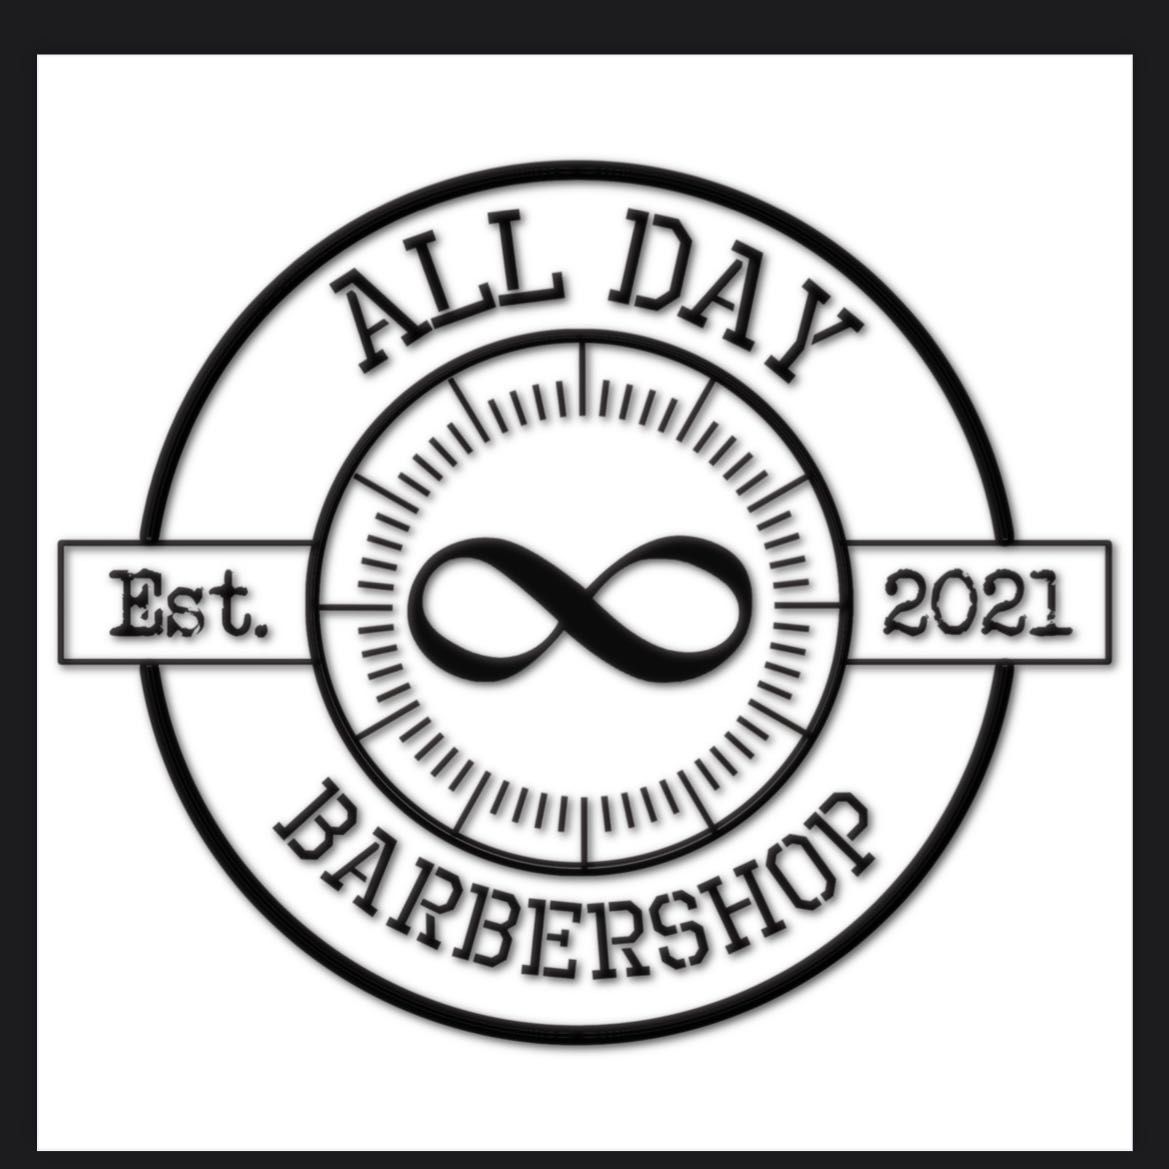 All Day Barbershop, 1000 South Palm Canyon Drive suite #101, Palm Springs, 92264